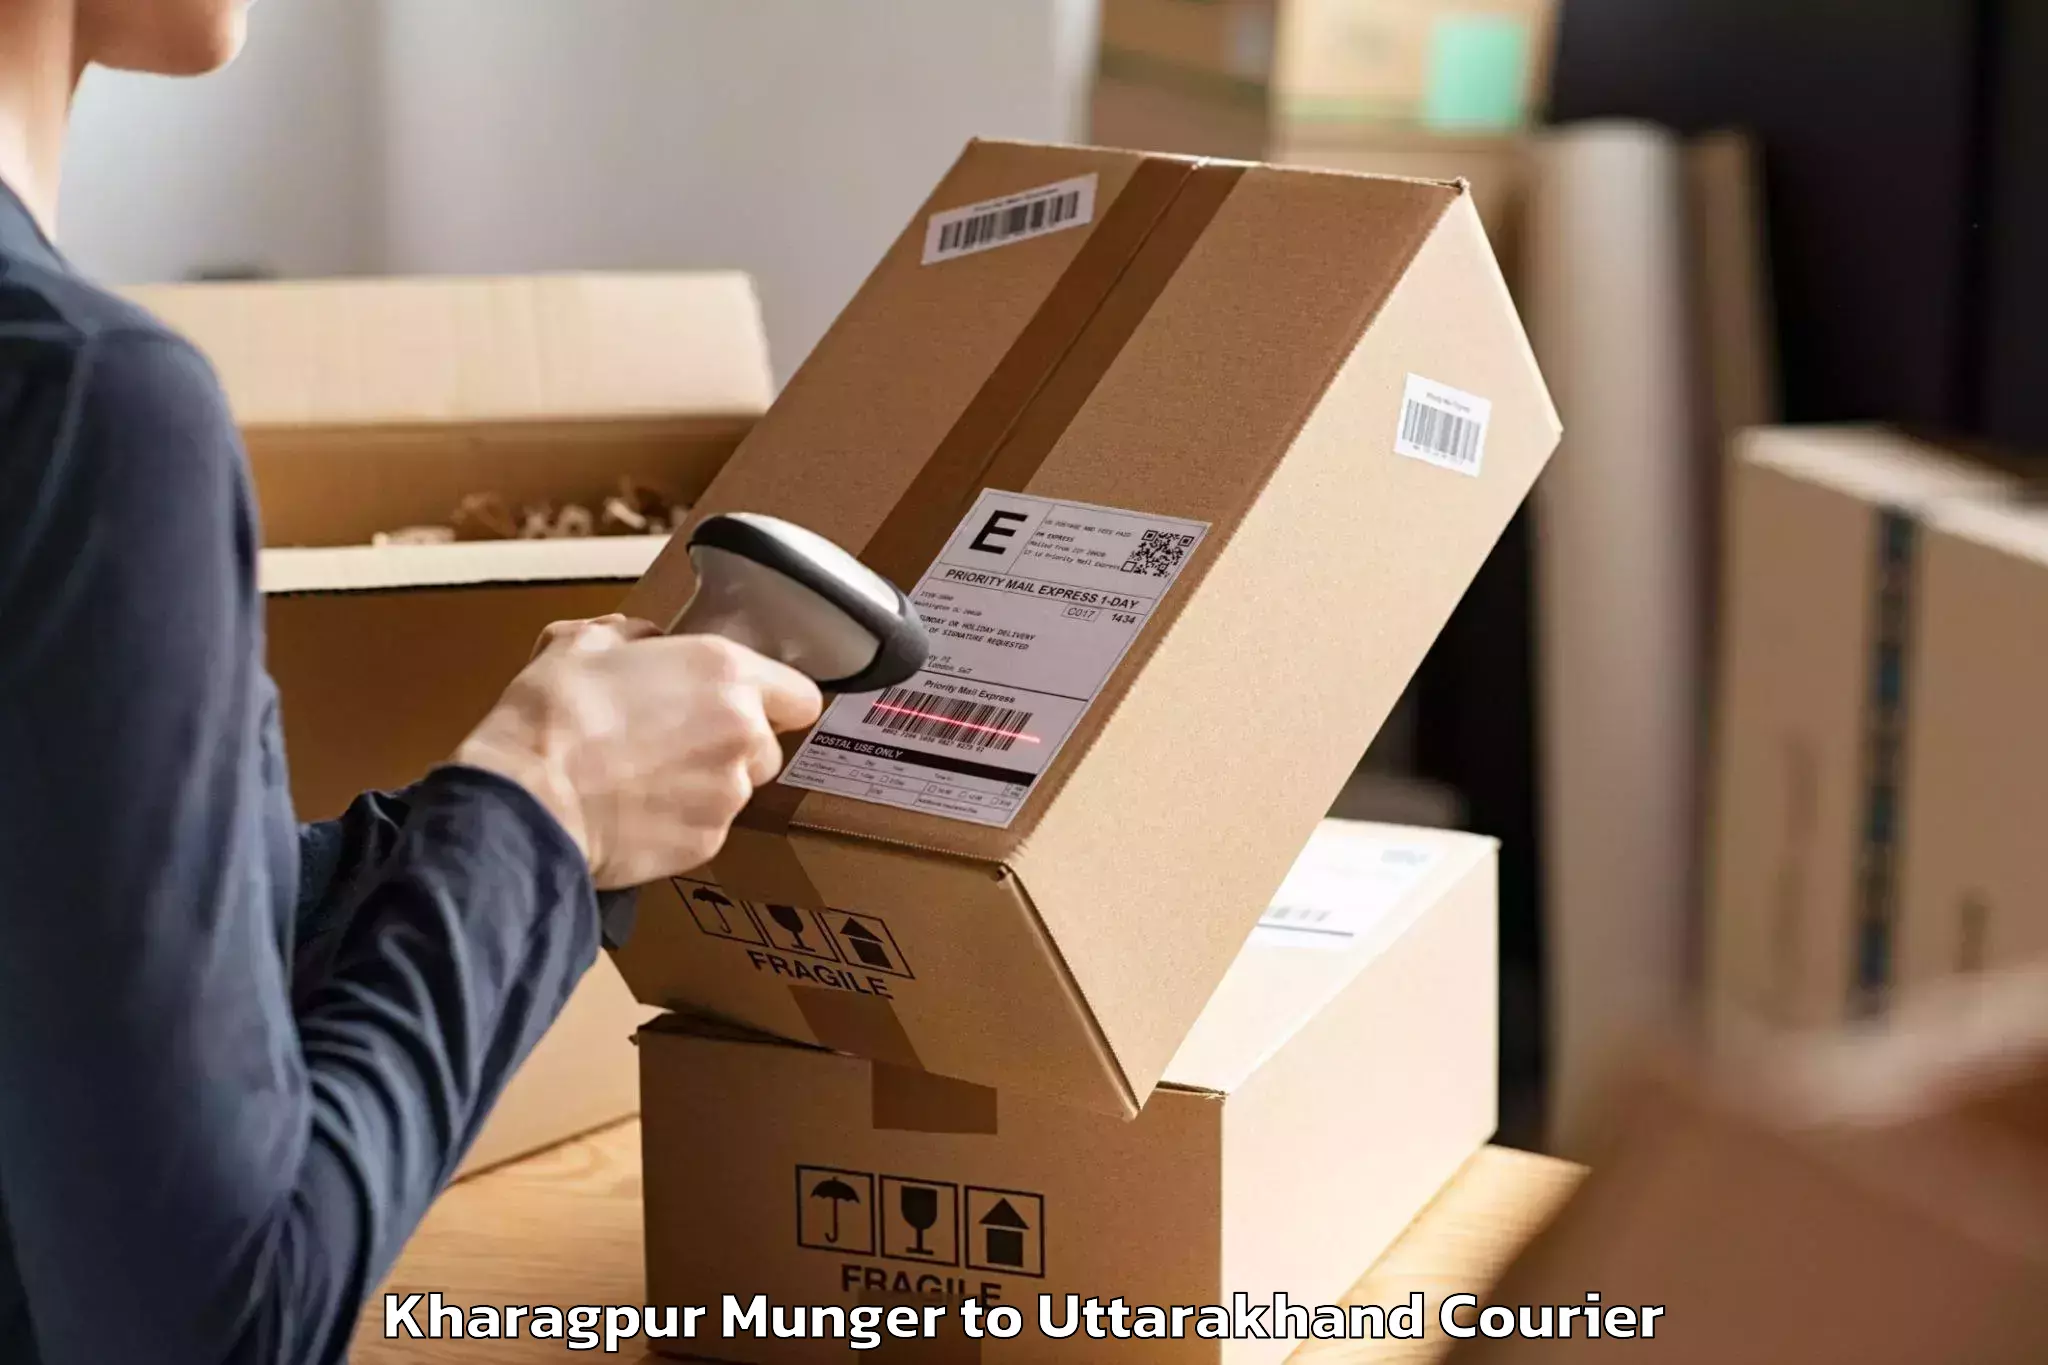 Tailored relocation services Kharagpur Munger to Pithoragarh